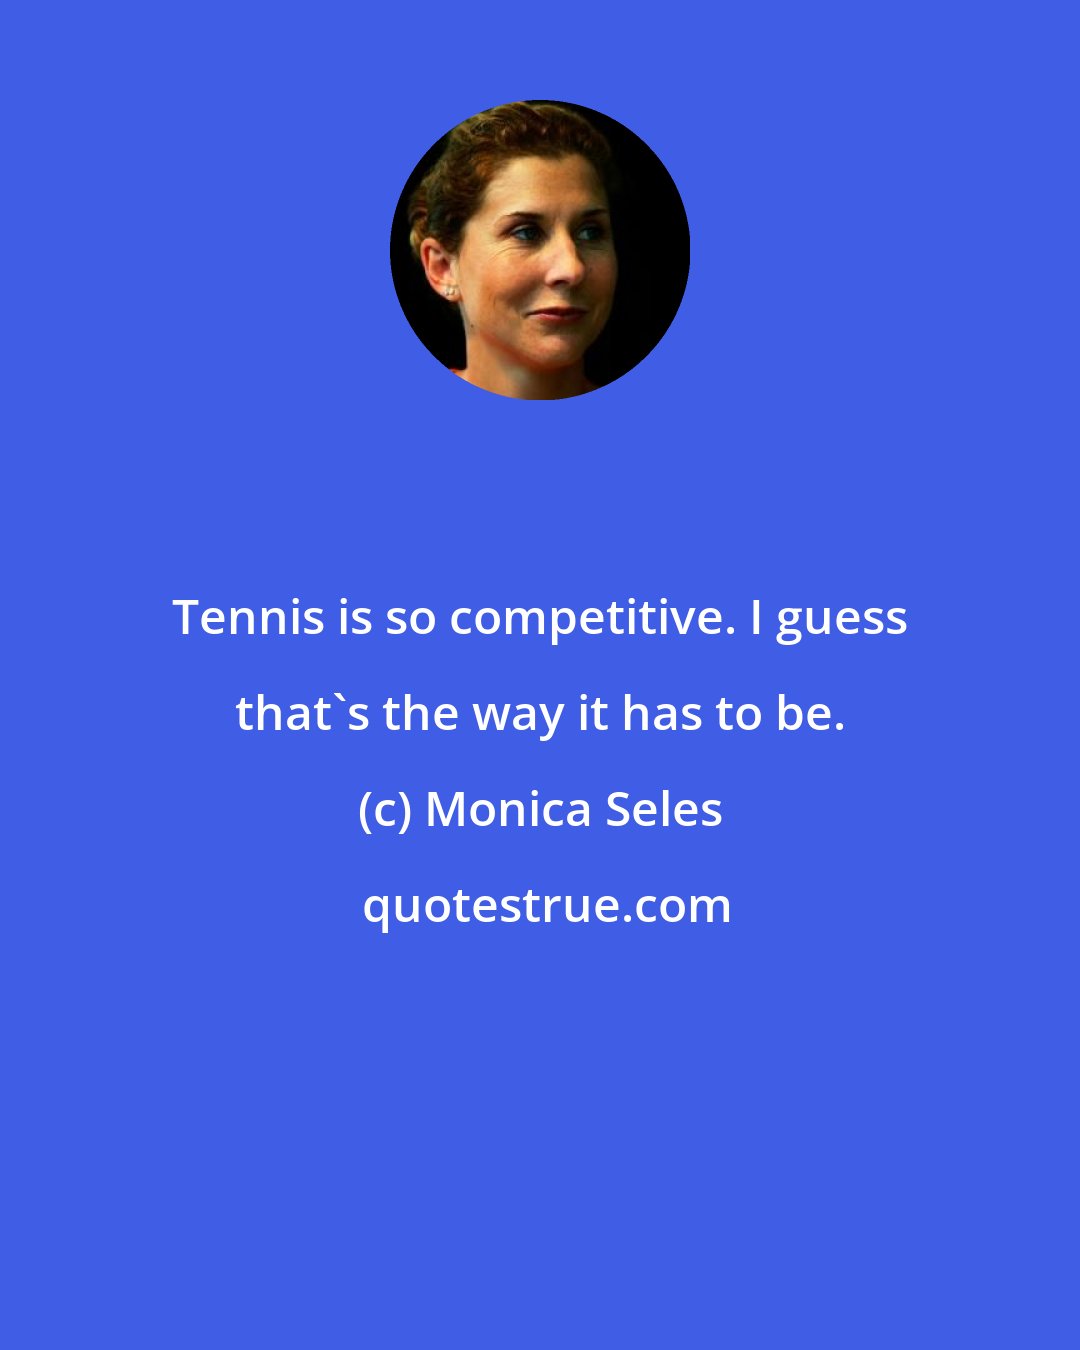 Monica Seles: Tennis is so competitive. I guess that's the way it has to be.